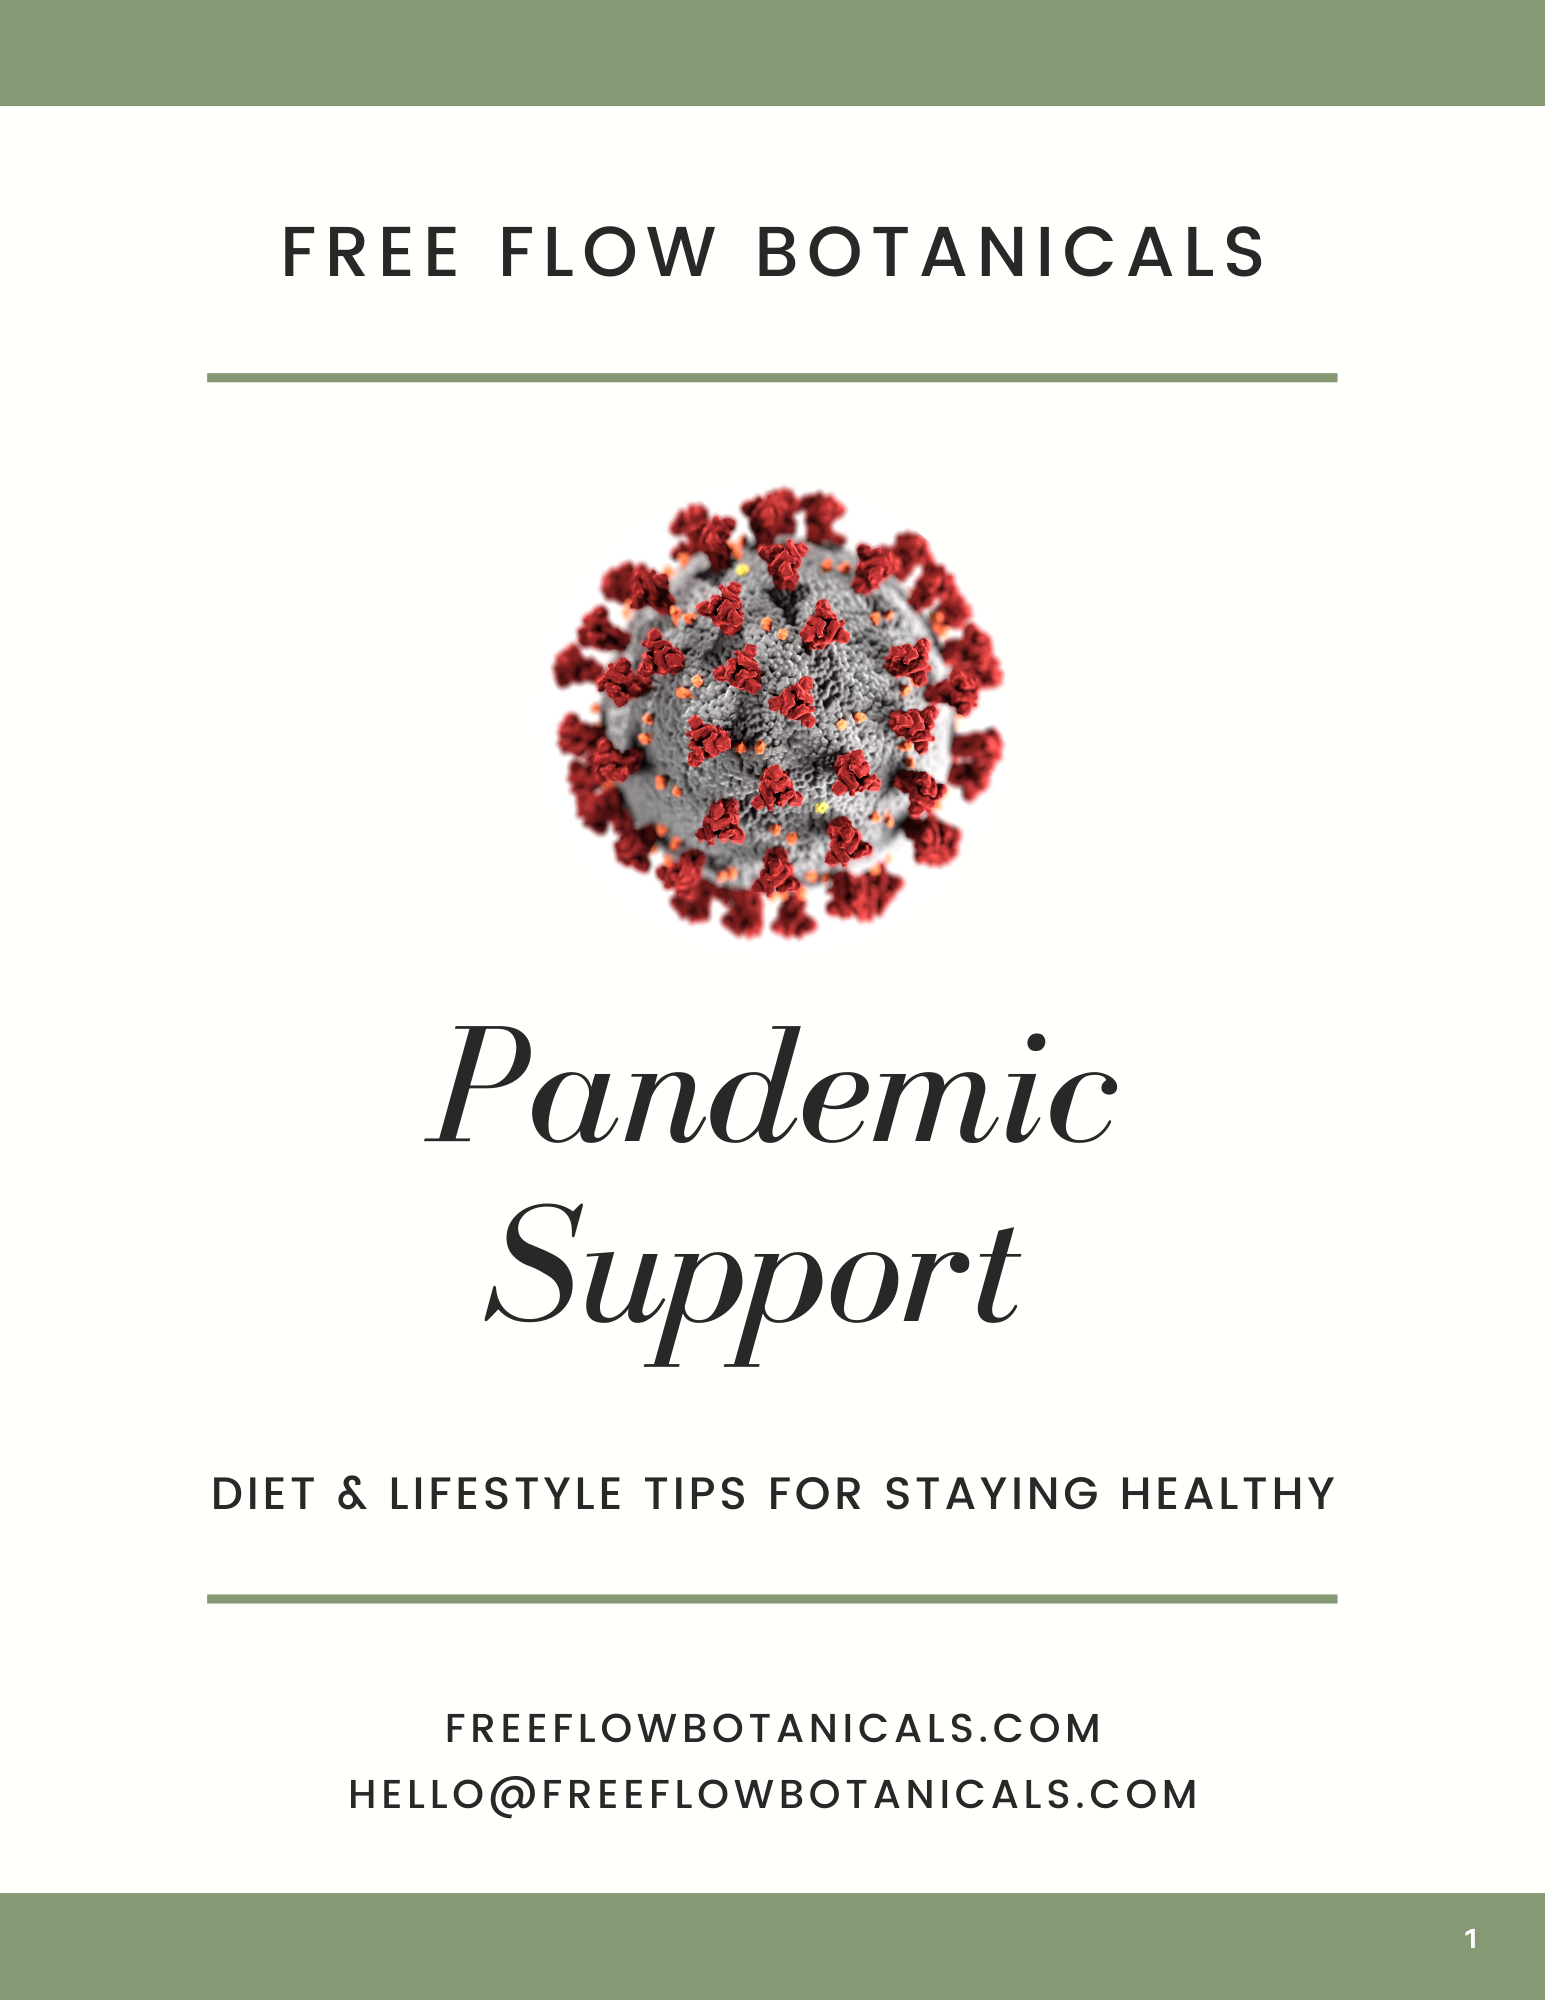 Pandemic Support: Tips for Staying Safe & Healthy